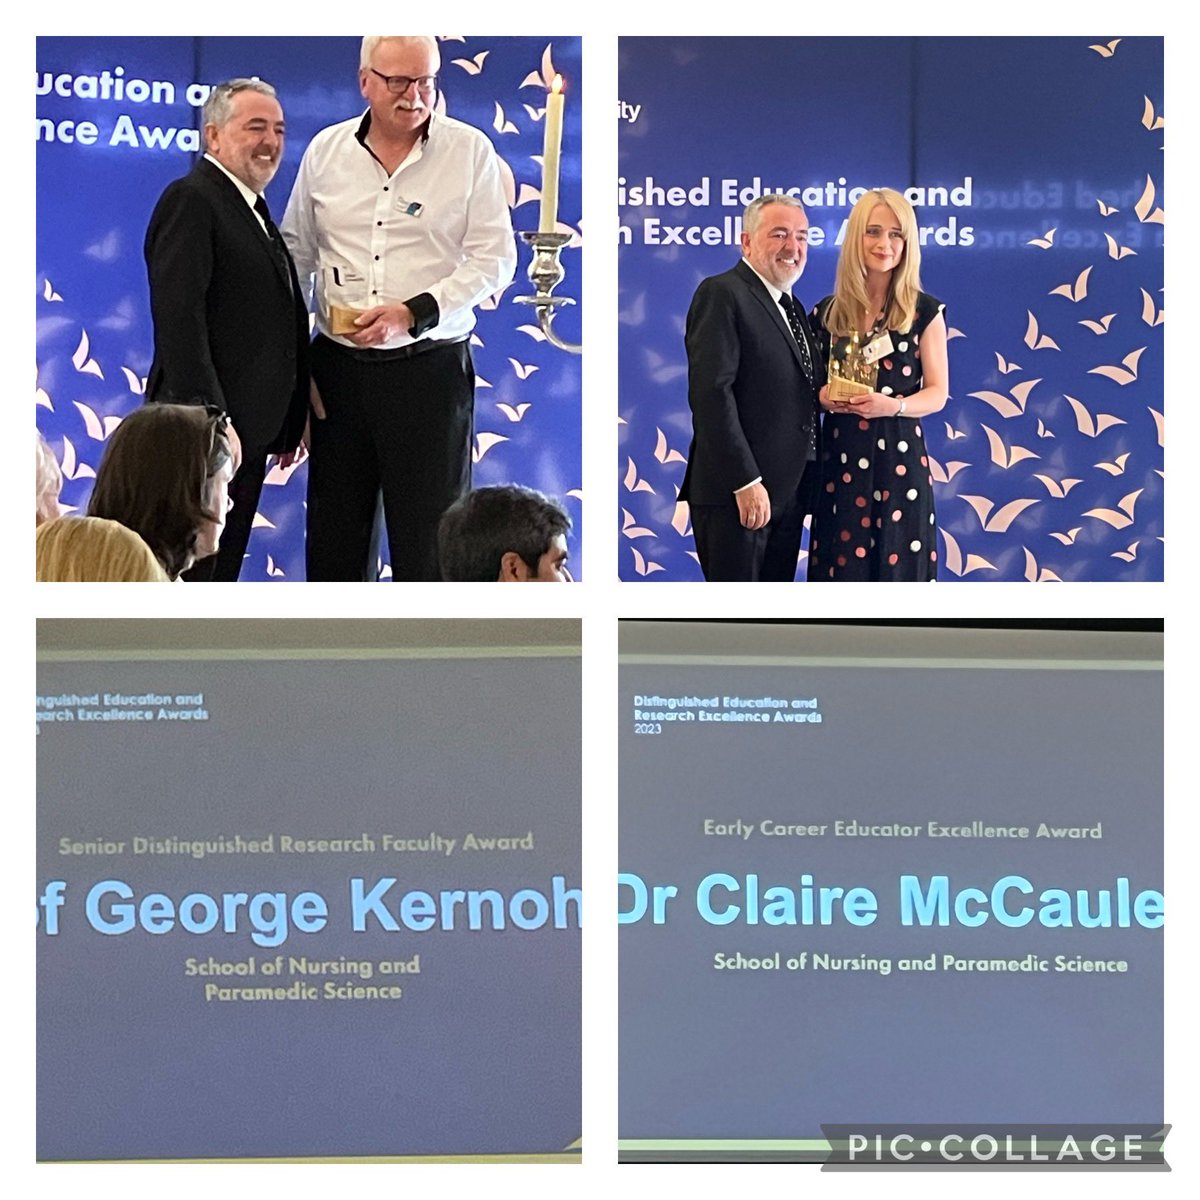 So many awards for our colleagues in @UlsterUniSoNP !! Celebrating distinguished education and research excellence awards. Well done @ProfessorPlay @ClaireMcCauley4 #proudofuu #ulsternurse #ulsterparamedics #weareuu